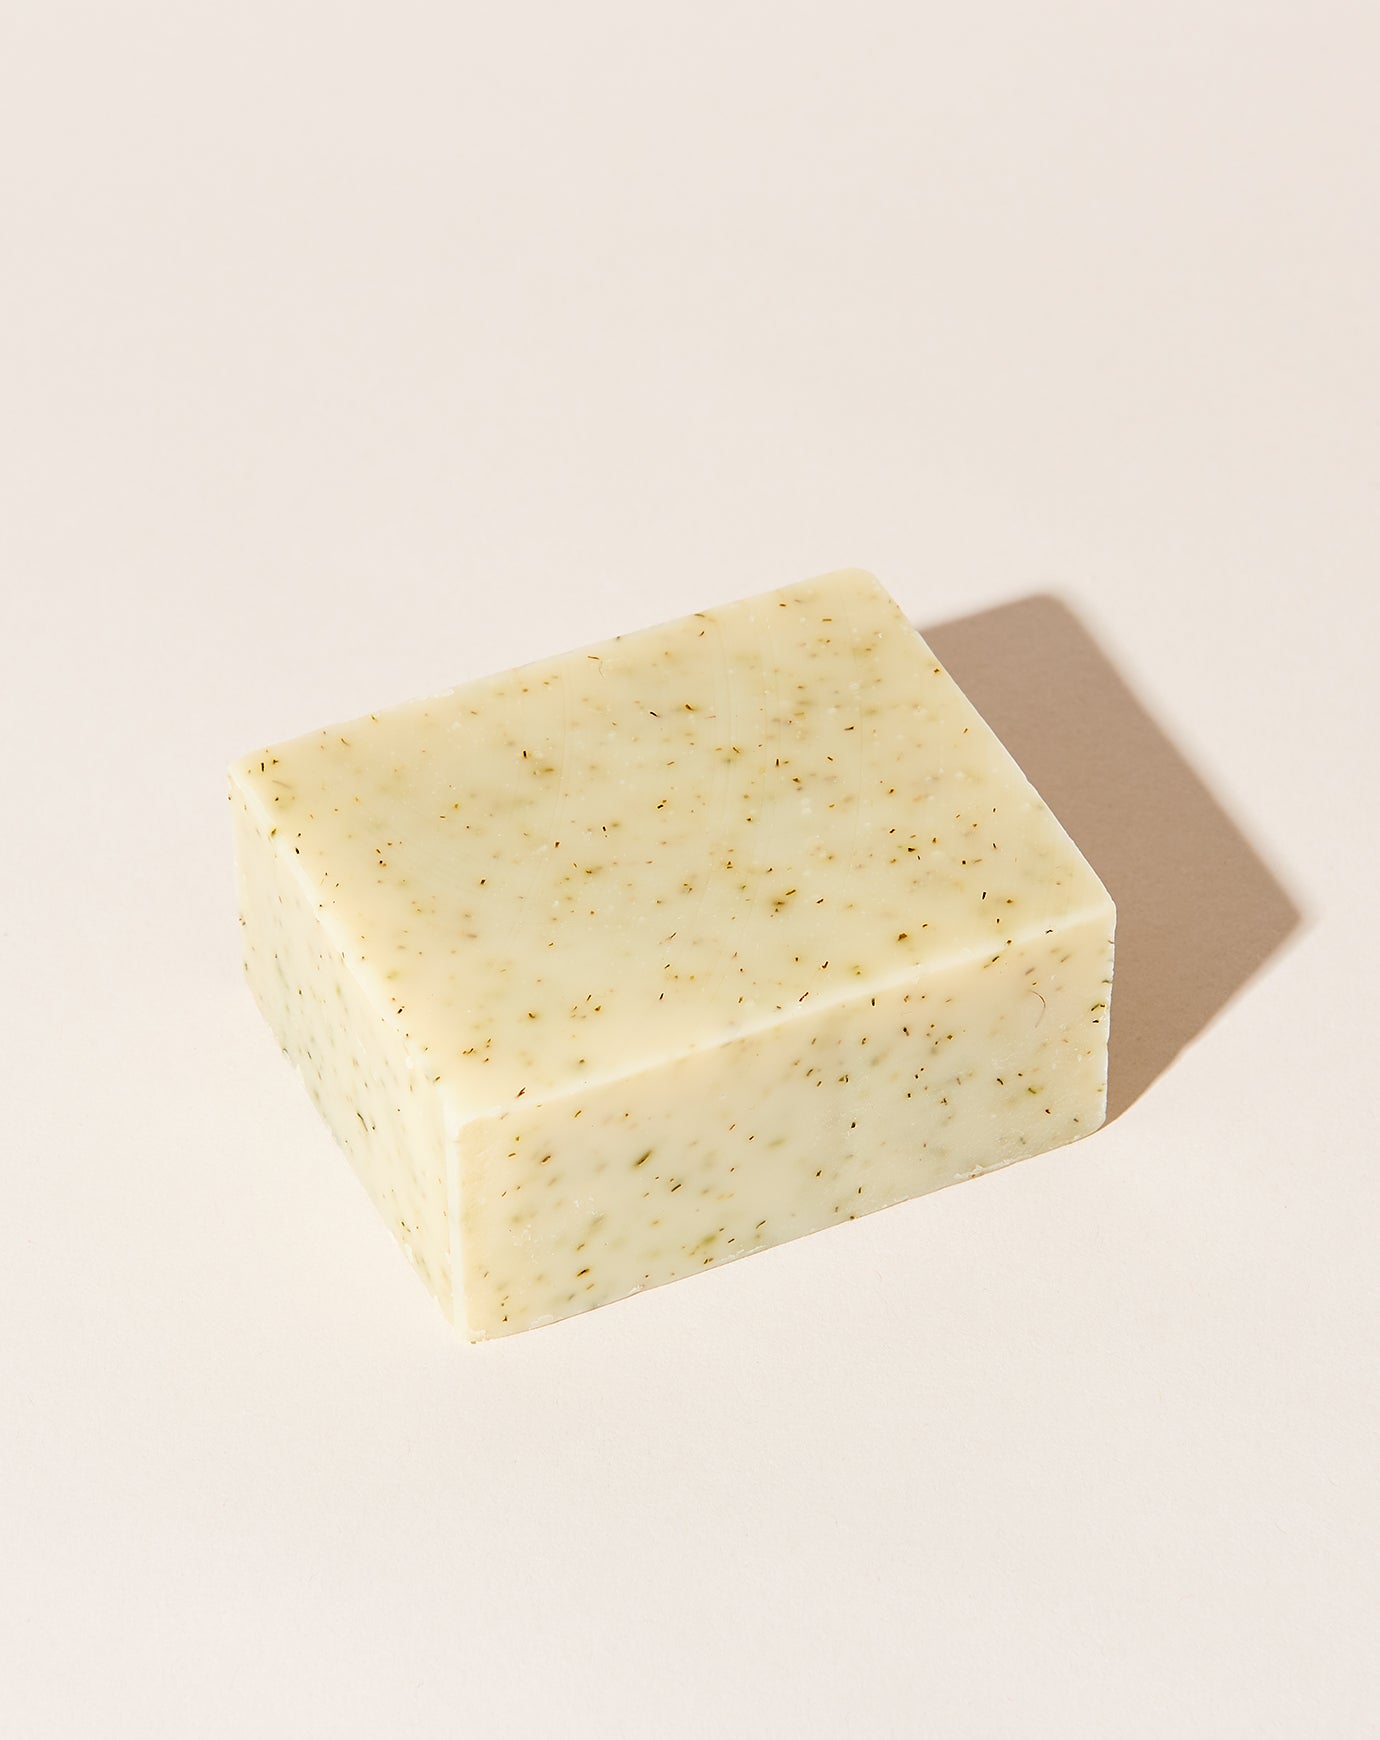 Saipua Soap in Clary Sage with Dill